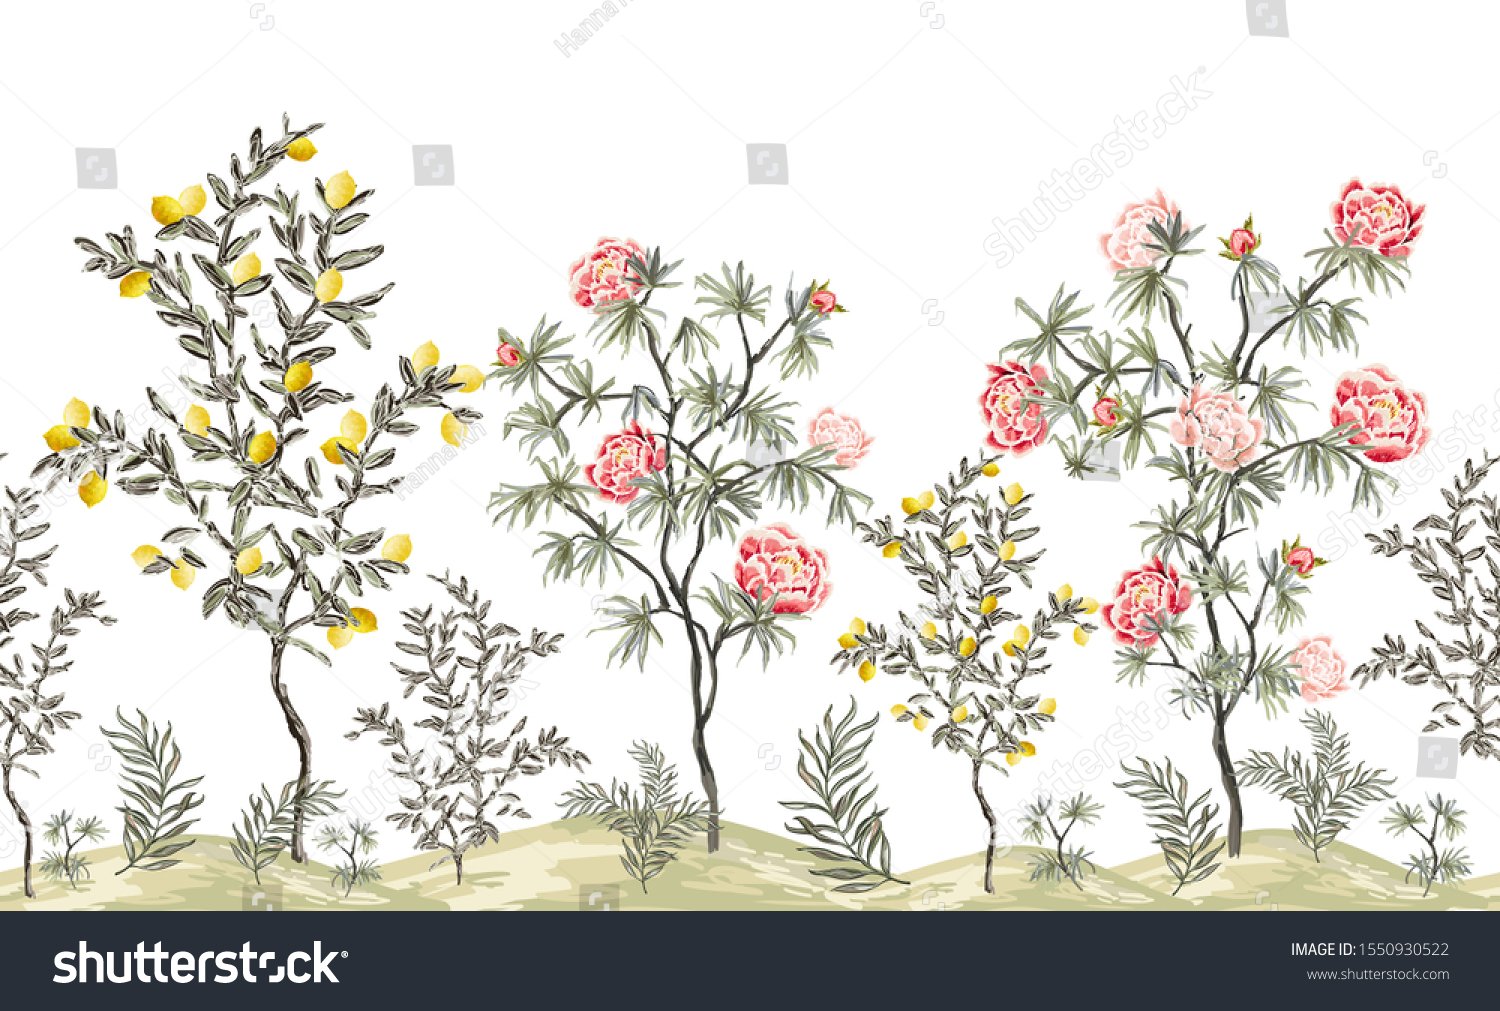 stock-vector-beautiful-exotic-chinoiserie-wallpaper-hand-drawn-vintage-chinese-rose-trees-palms-flowers-1550930522.jpg